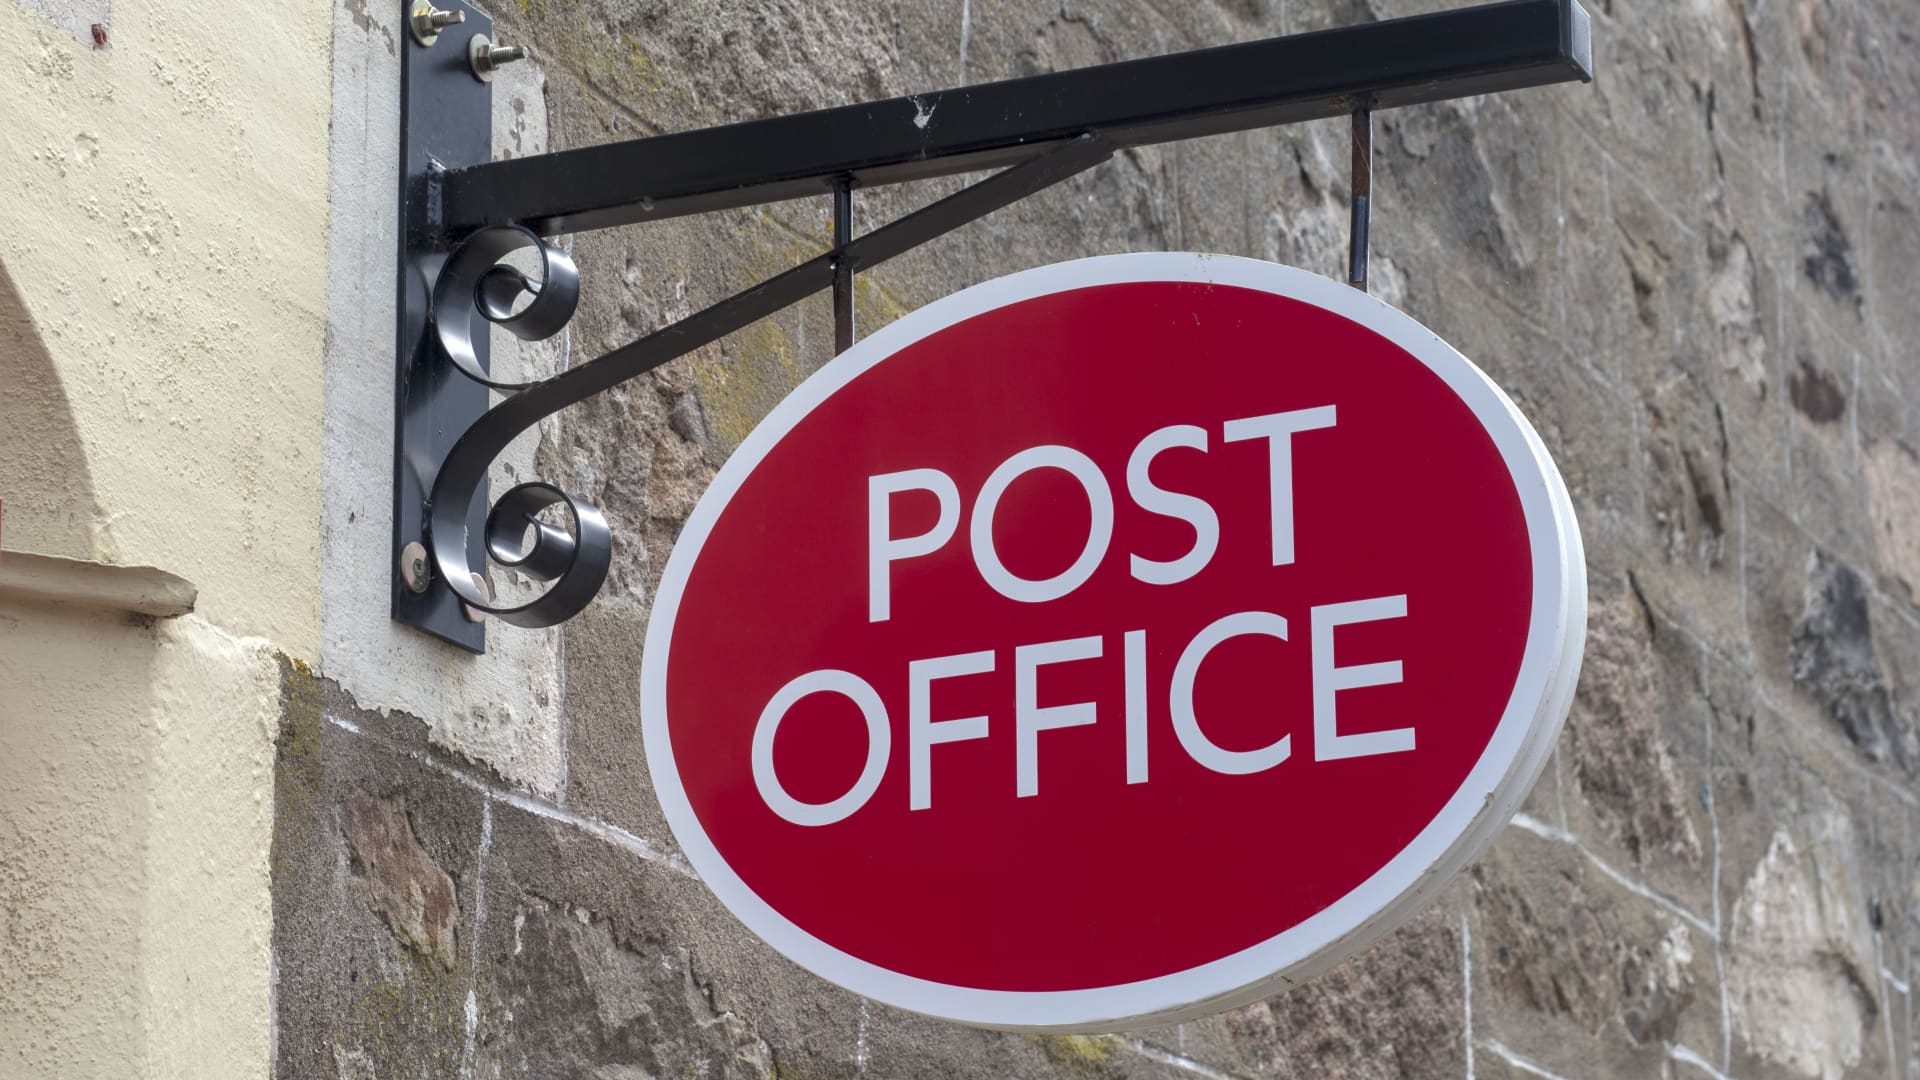 Fujitsu role in Britain's Post Office scandal could have severe reputational consequences, analysts say